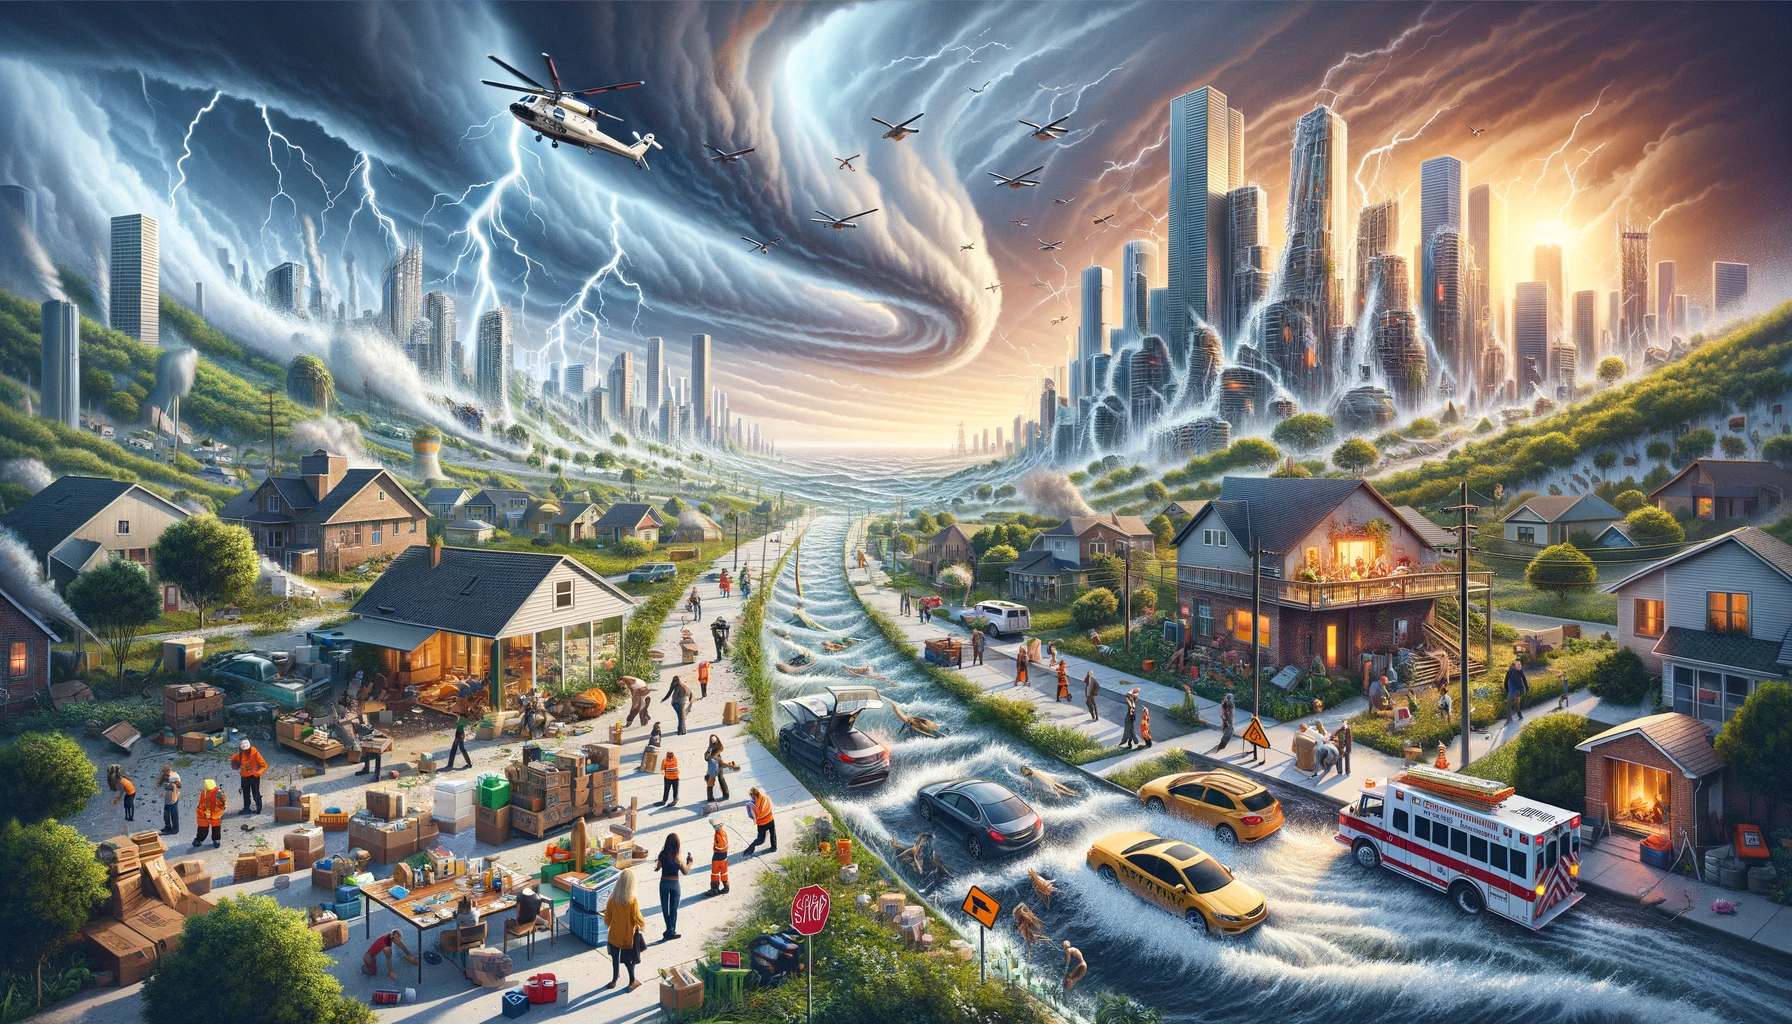 An ultra-detailed and vibrant depiction of comprehensive natural disaster preparedness, showcasing advanced evacuation planning, a wide range of emergency supplies, innovative securing techniques, and community engagement, highlighting meticulous planning and heightened readiness.